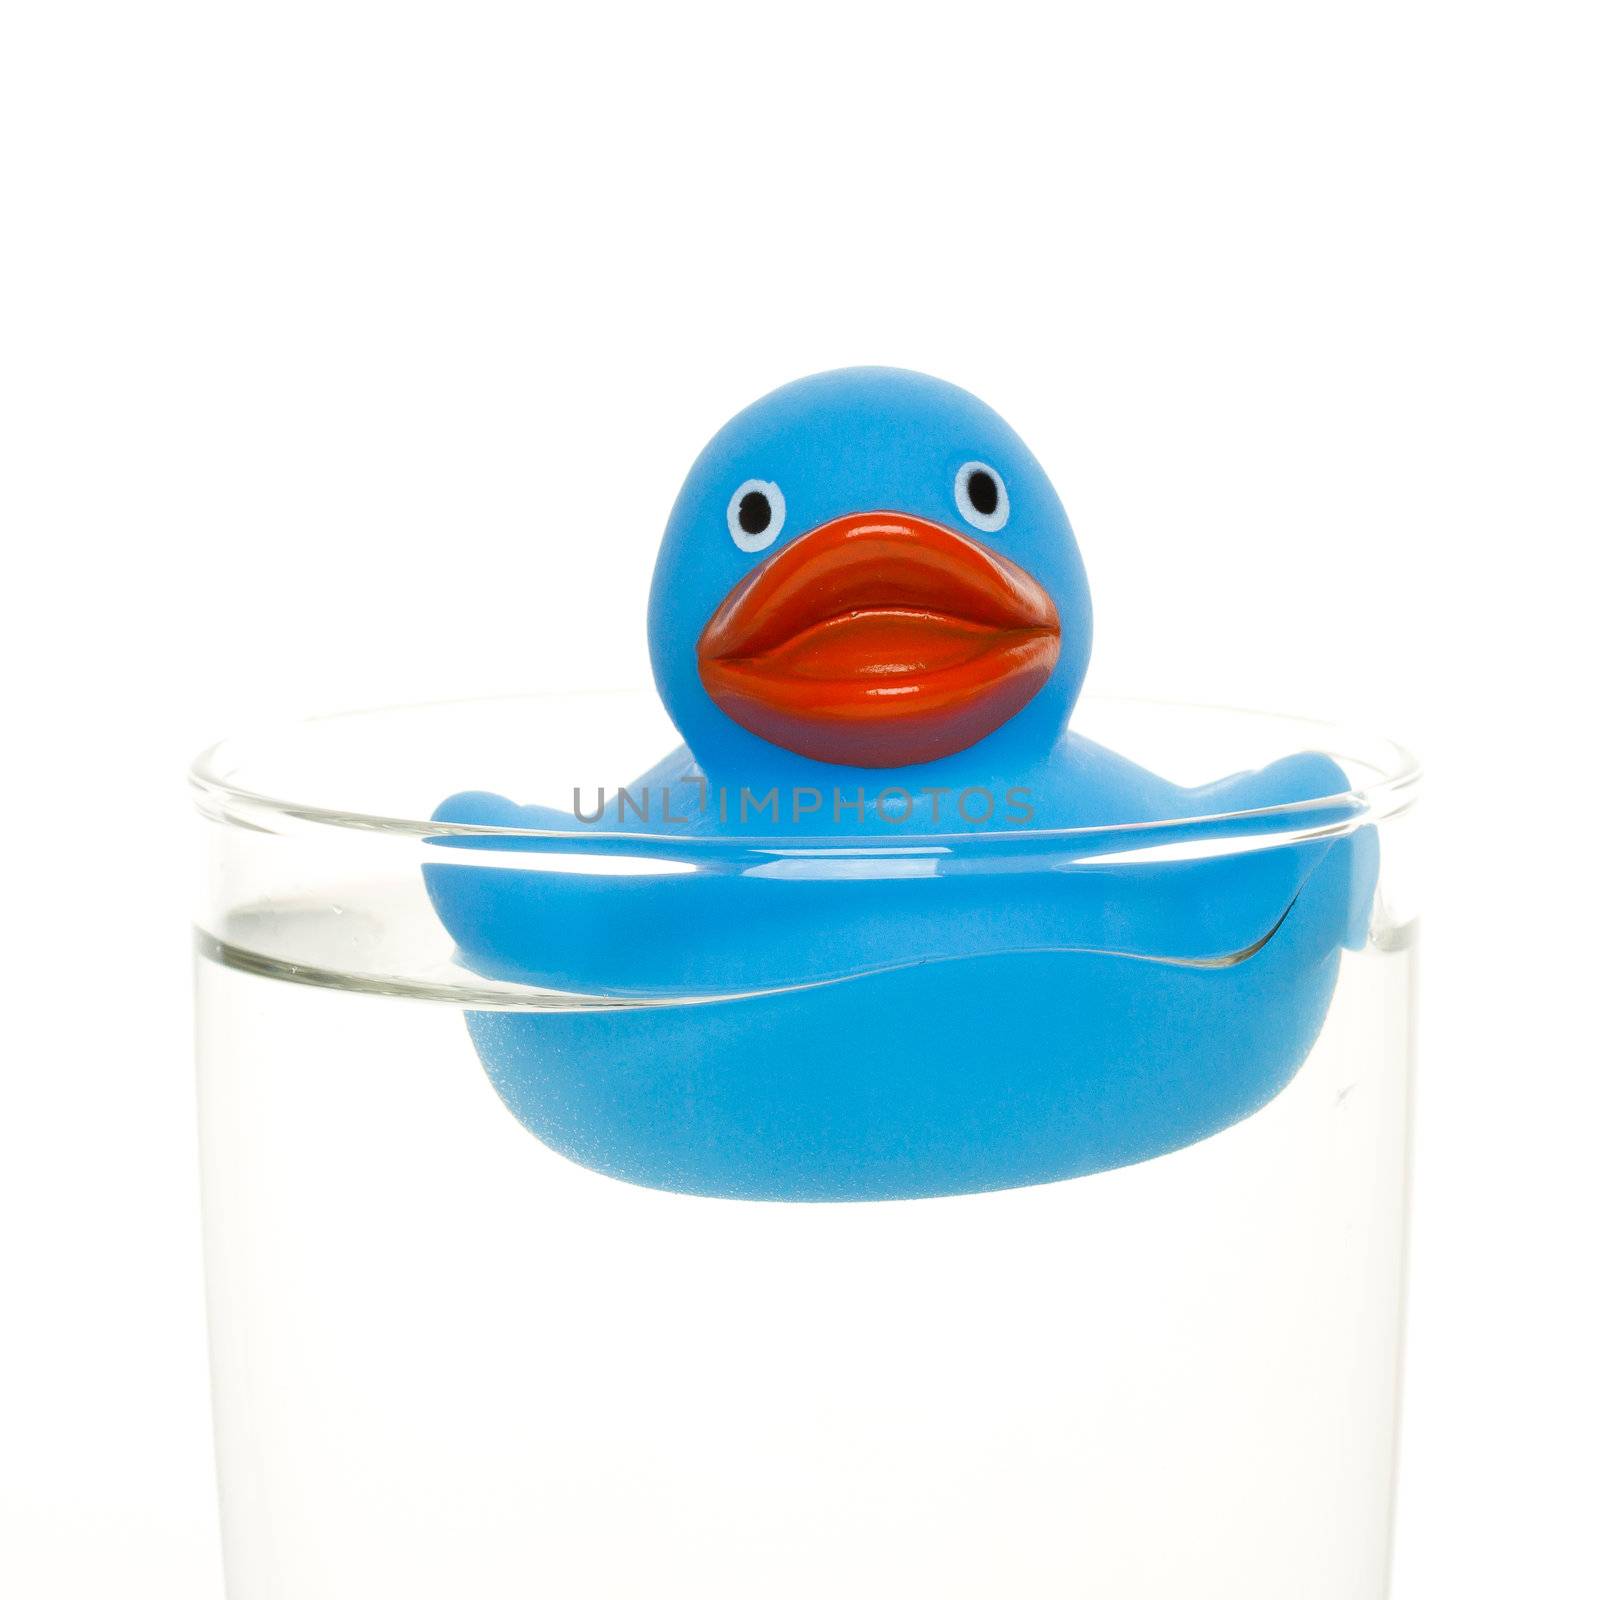 Blue duck in a glass of water